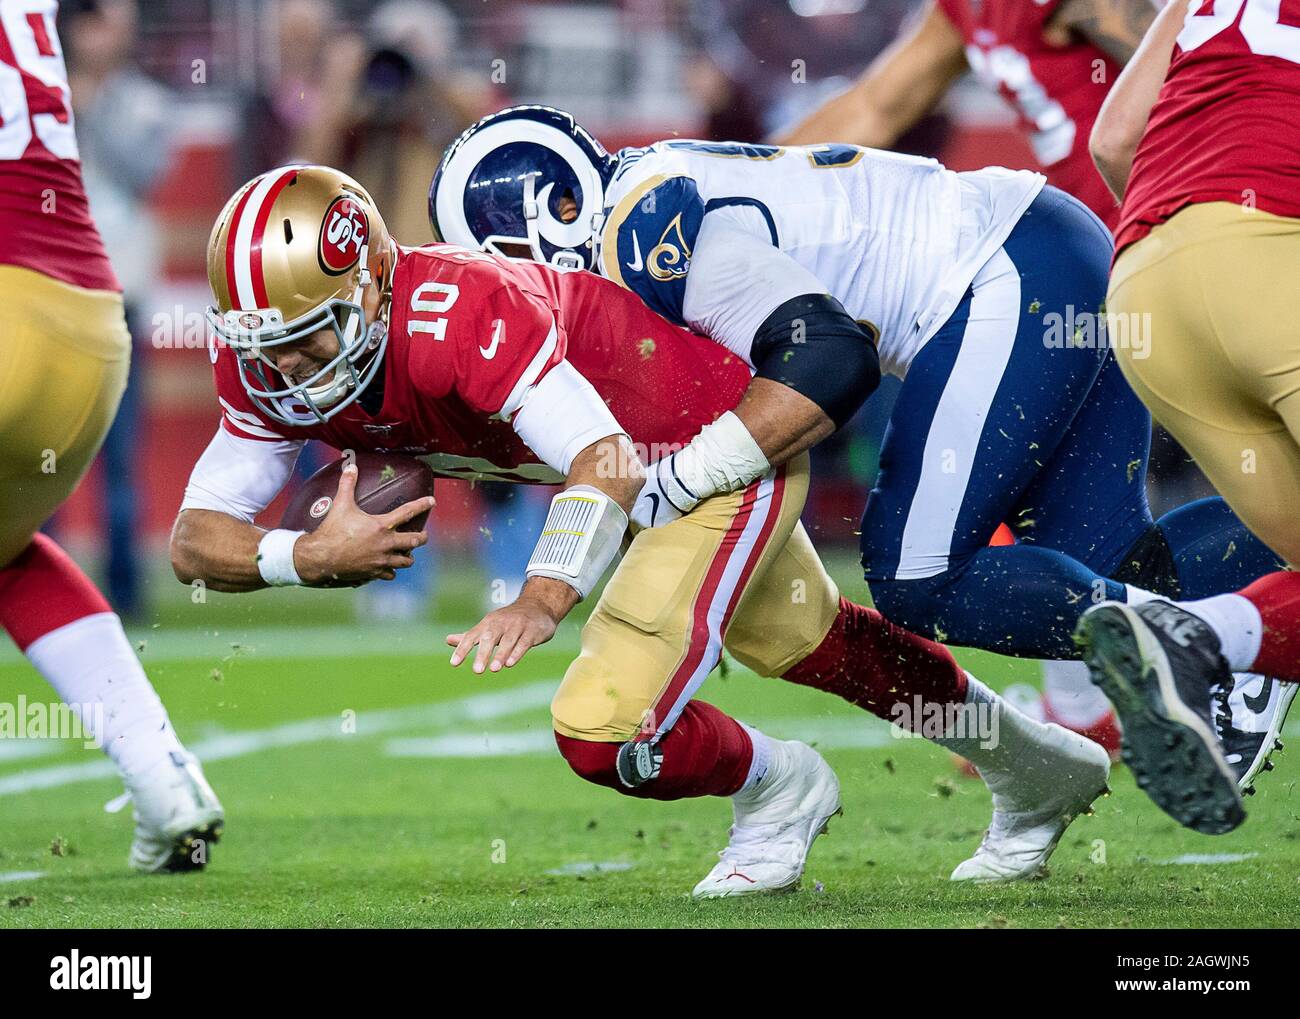 Santa Clara, CA, USA. 21st Dec, 2019. s10 is sacked by Los Angeles Rams defensive tackle Aaron Donald (99) in the third quarter during a game at Levi's Stadium on Saturday, December 21, 2019 in Santa Clara, Calif. Credit: Paul Kitagaki Jr./ZUMA Wire/Alamy Live News Stock Photo